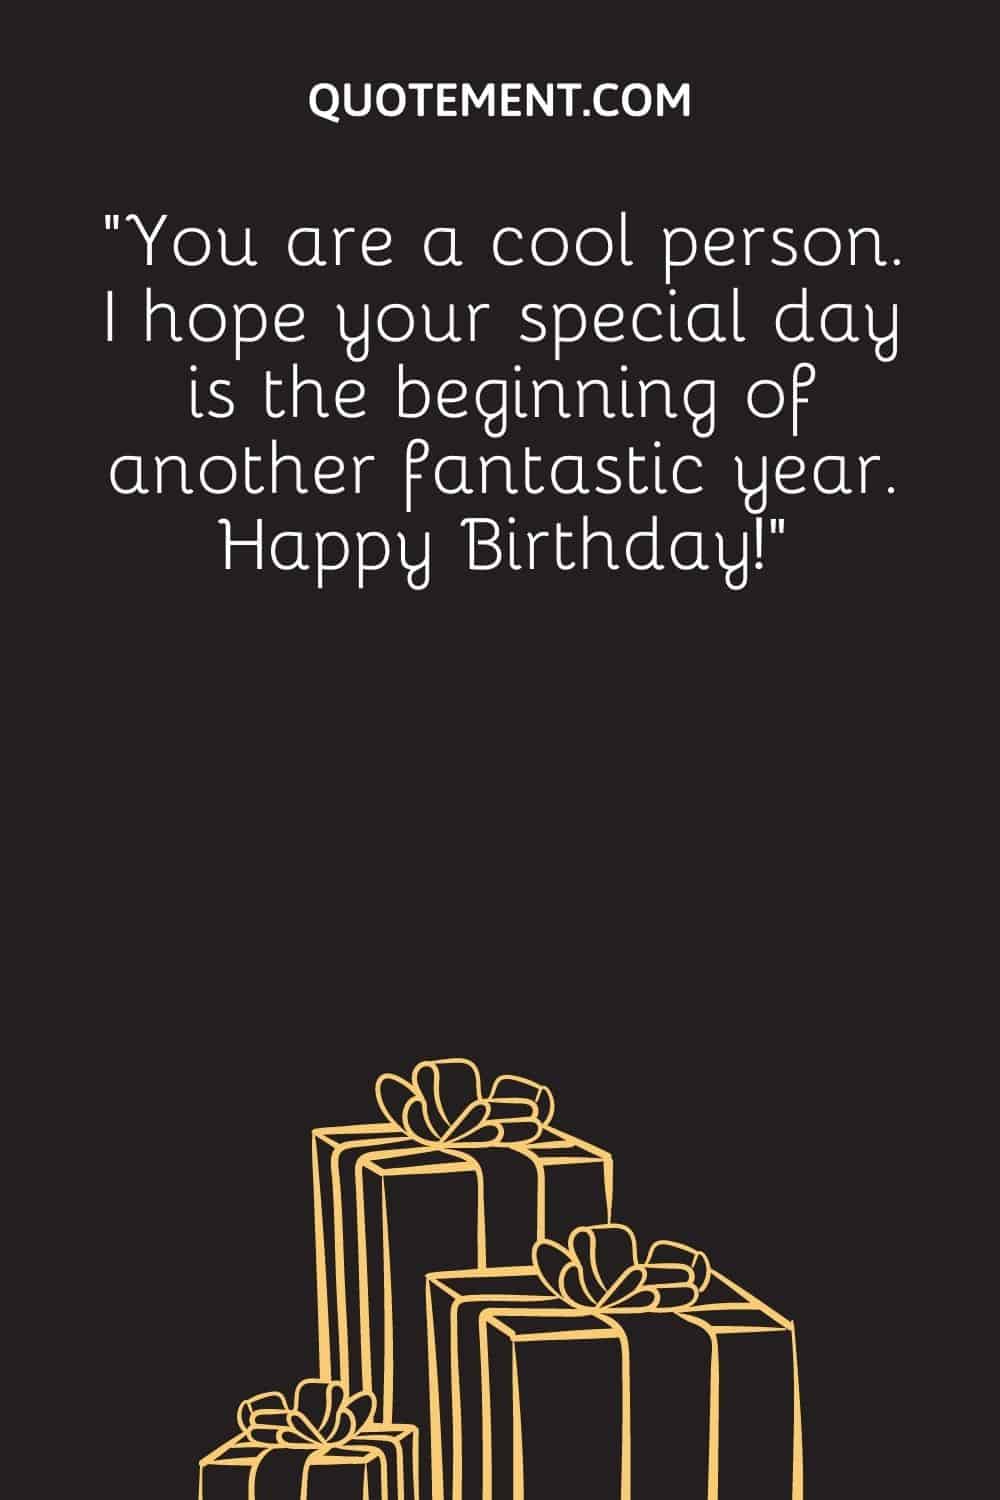 “You are a cool person. I hope your special day is the beginning of another fantastic year. Happy Birthday!”